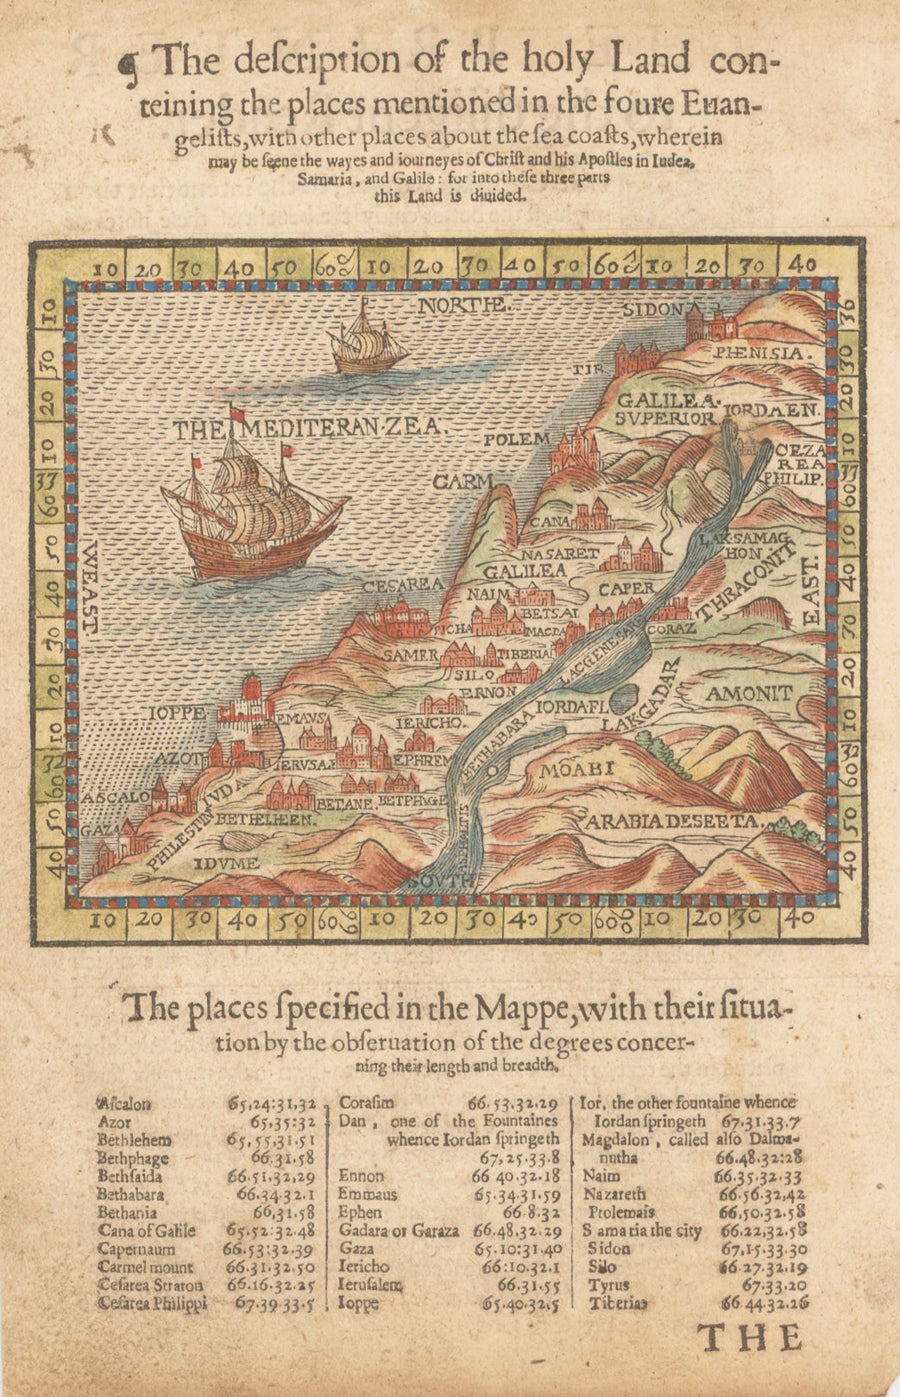 1599 The description of the holy Land conteining the places mentioned in the foure Euangelists…